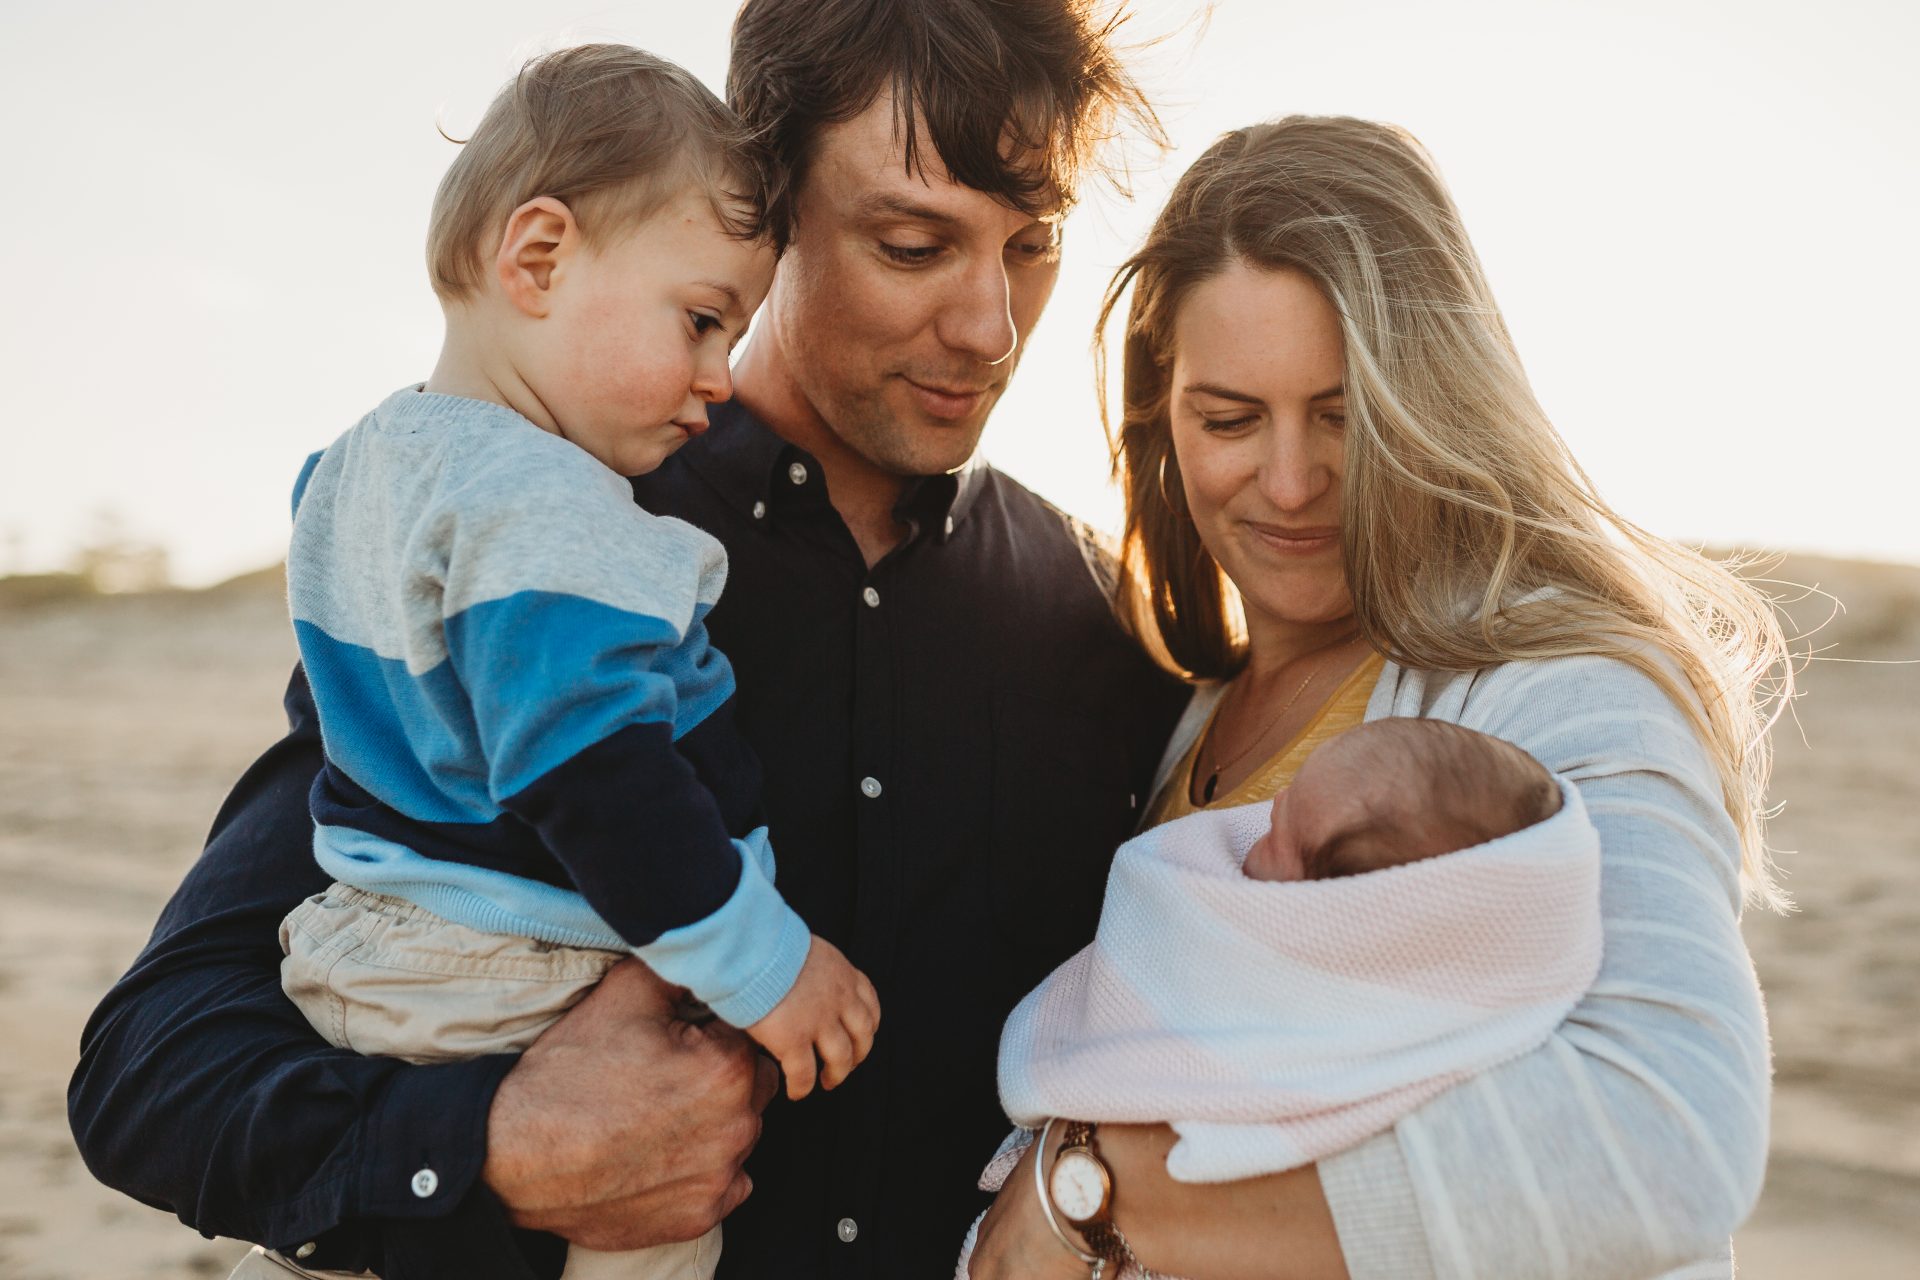 Man, woman and toddler all looking lovingly at newborn baby girl